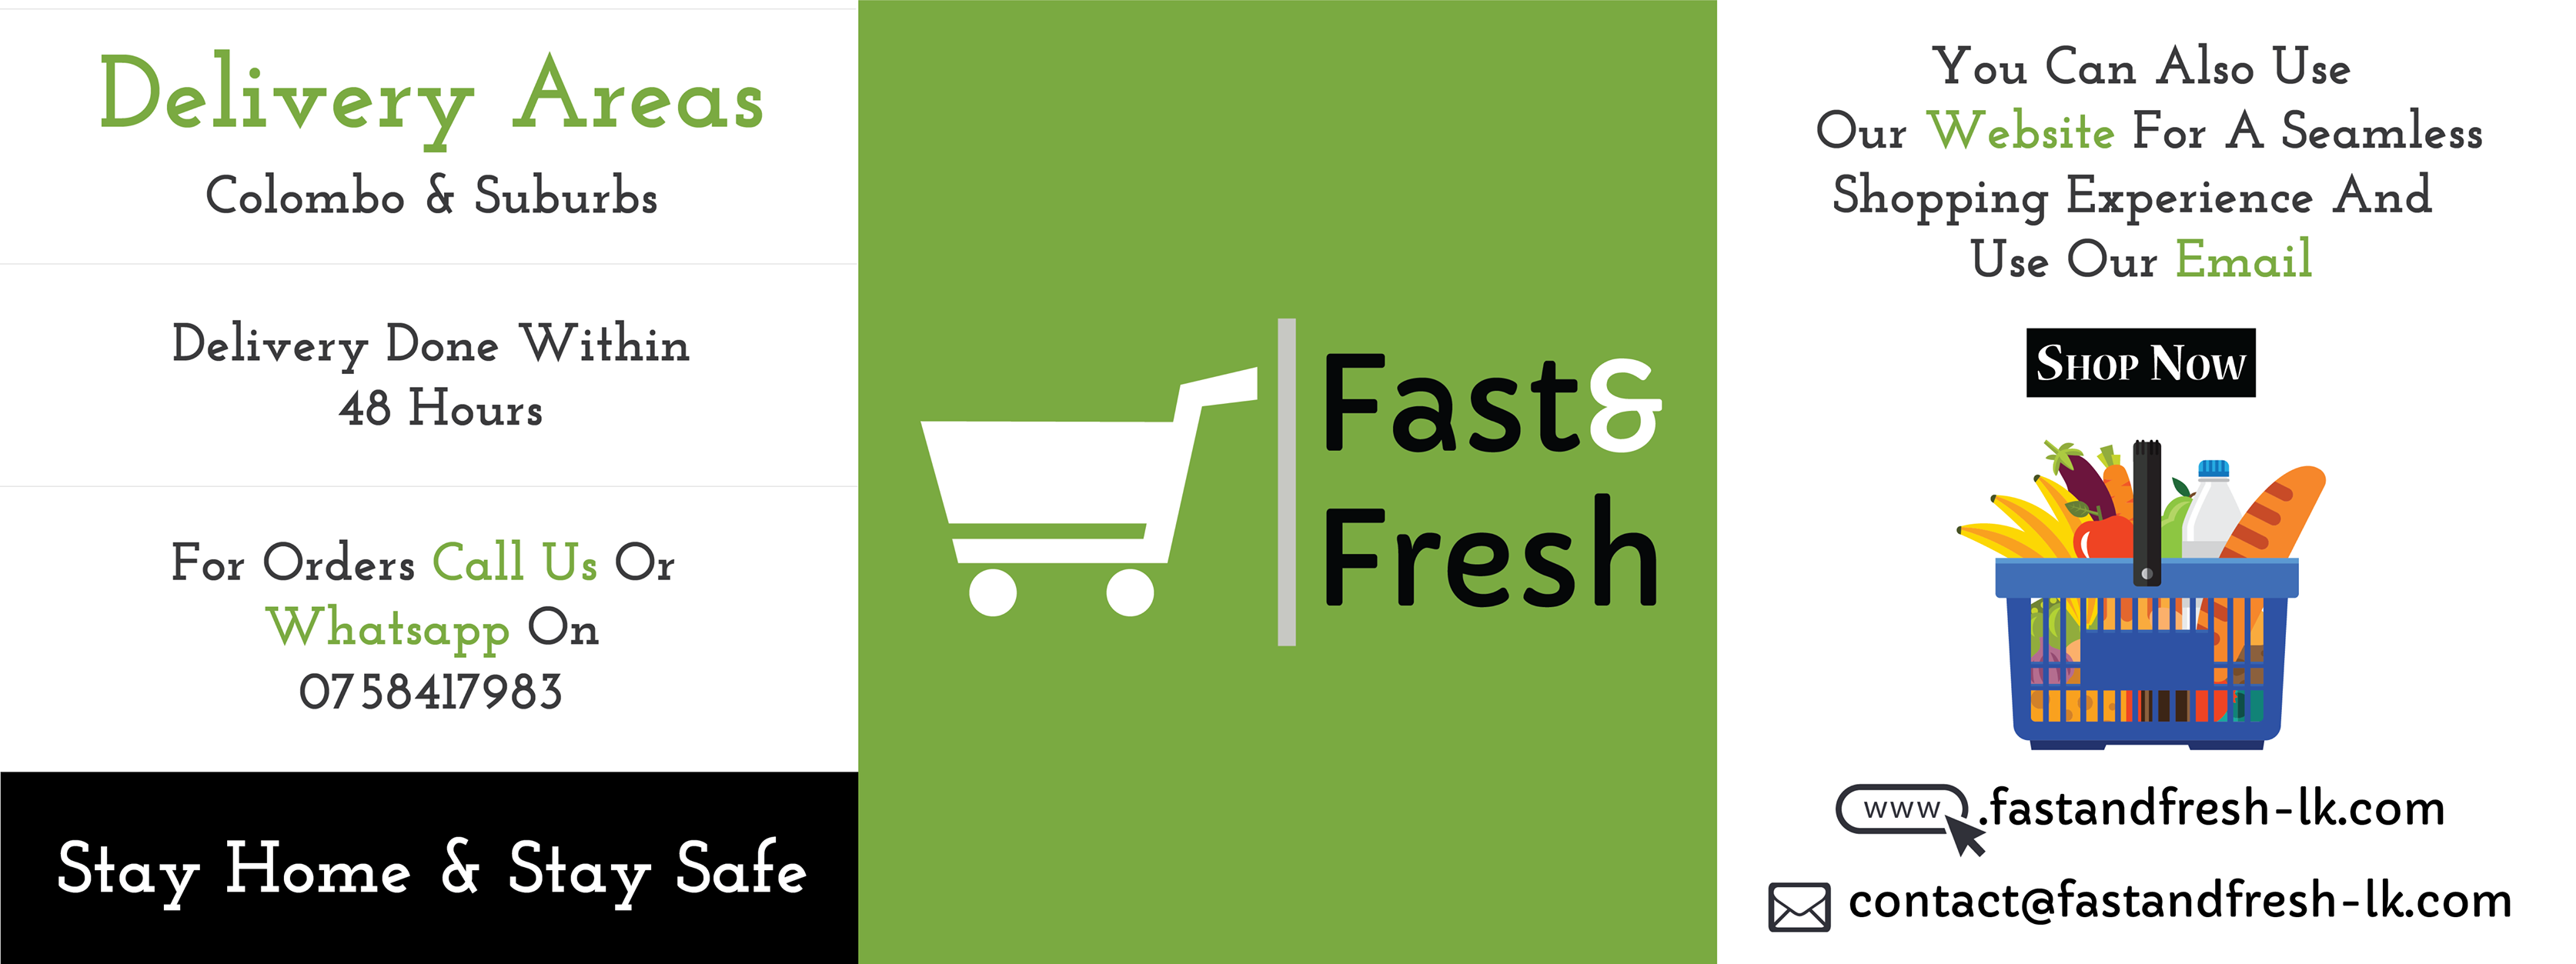 Fast and Fresh Delivery Details